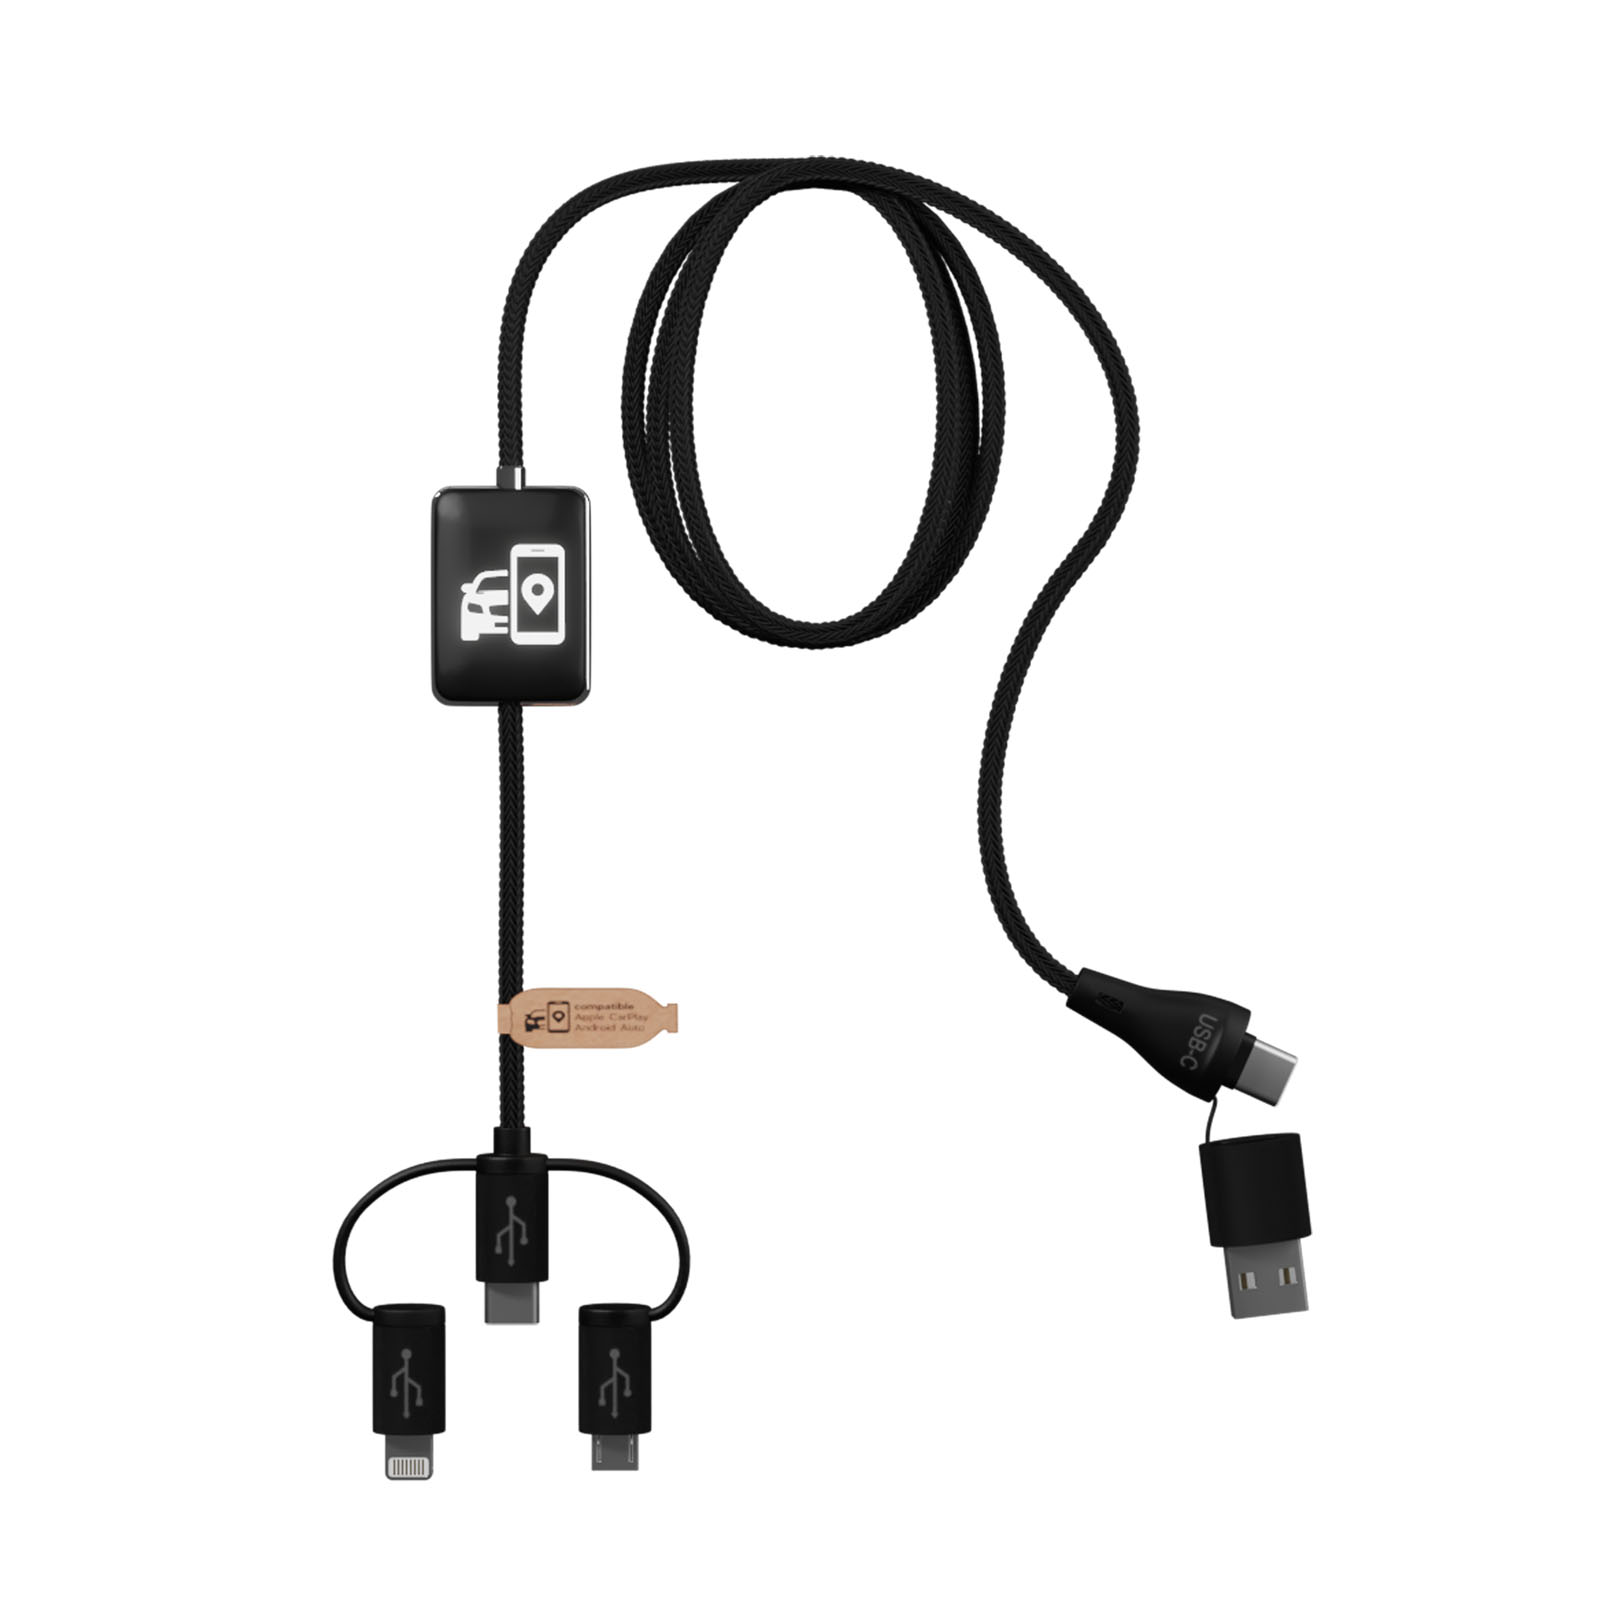 EcoConnect 5-in-1 Charging Cable - Rockborne - Bedford